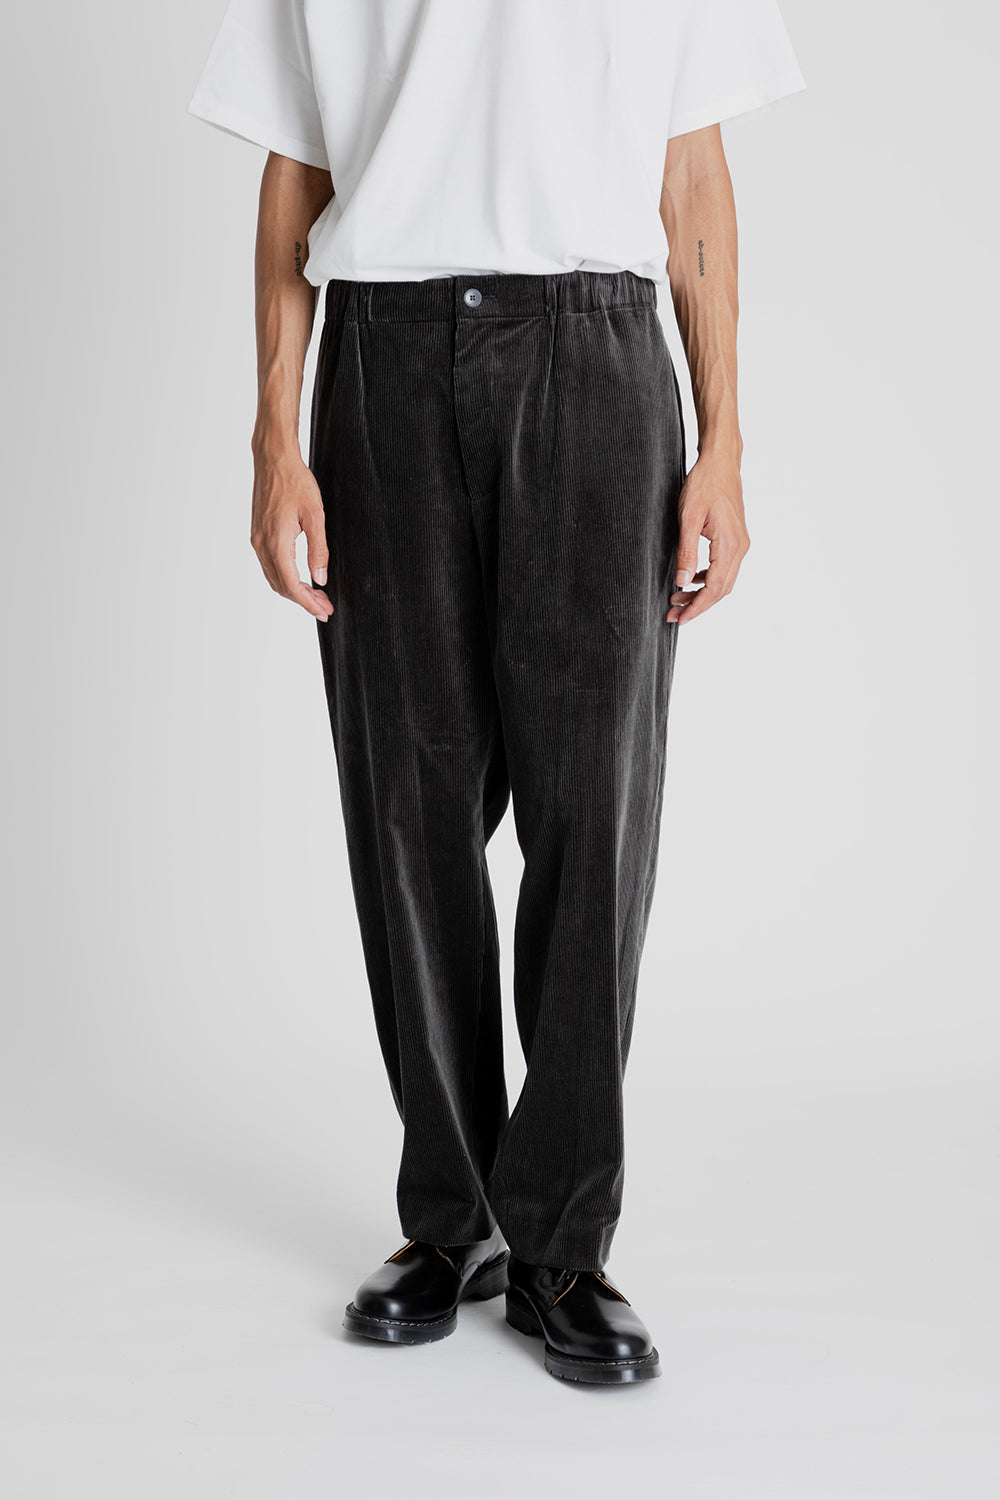 Aton Merino College Flannel Wide Pants - Charcoal Gray | Wallace